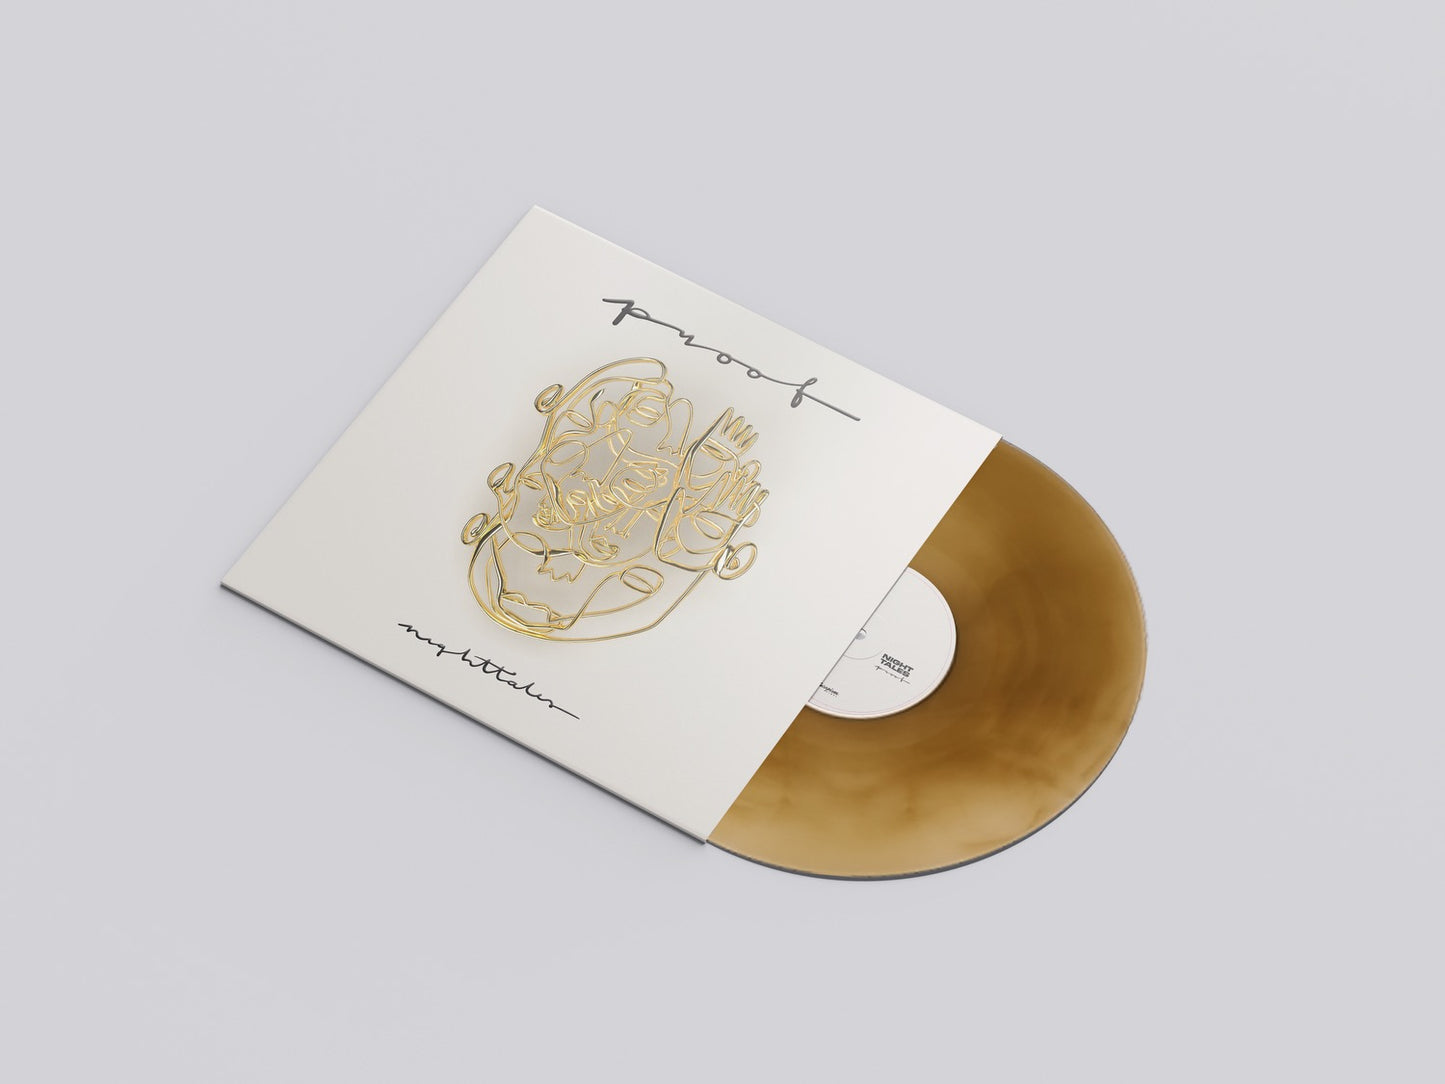 "Proof" Limited Edition Anniversary LP